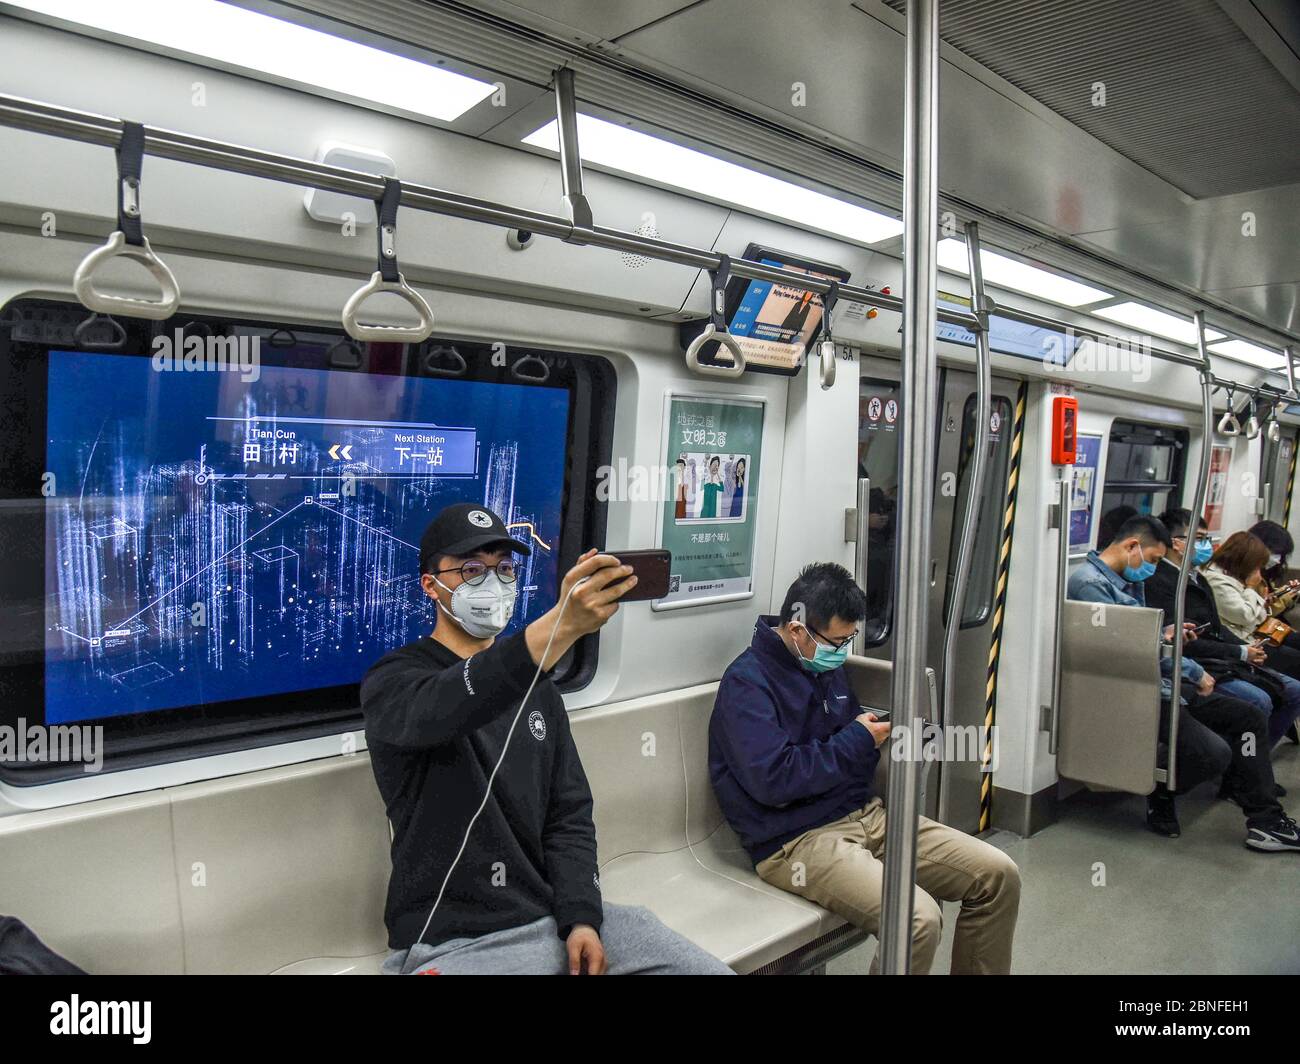 Students play online games inside a subway train in Beijing